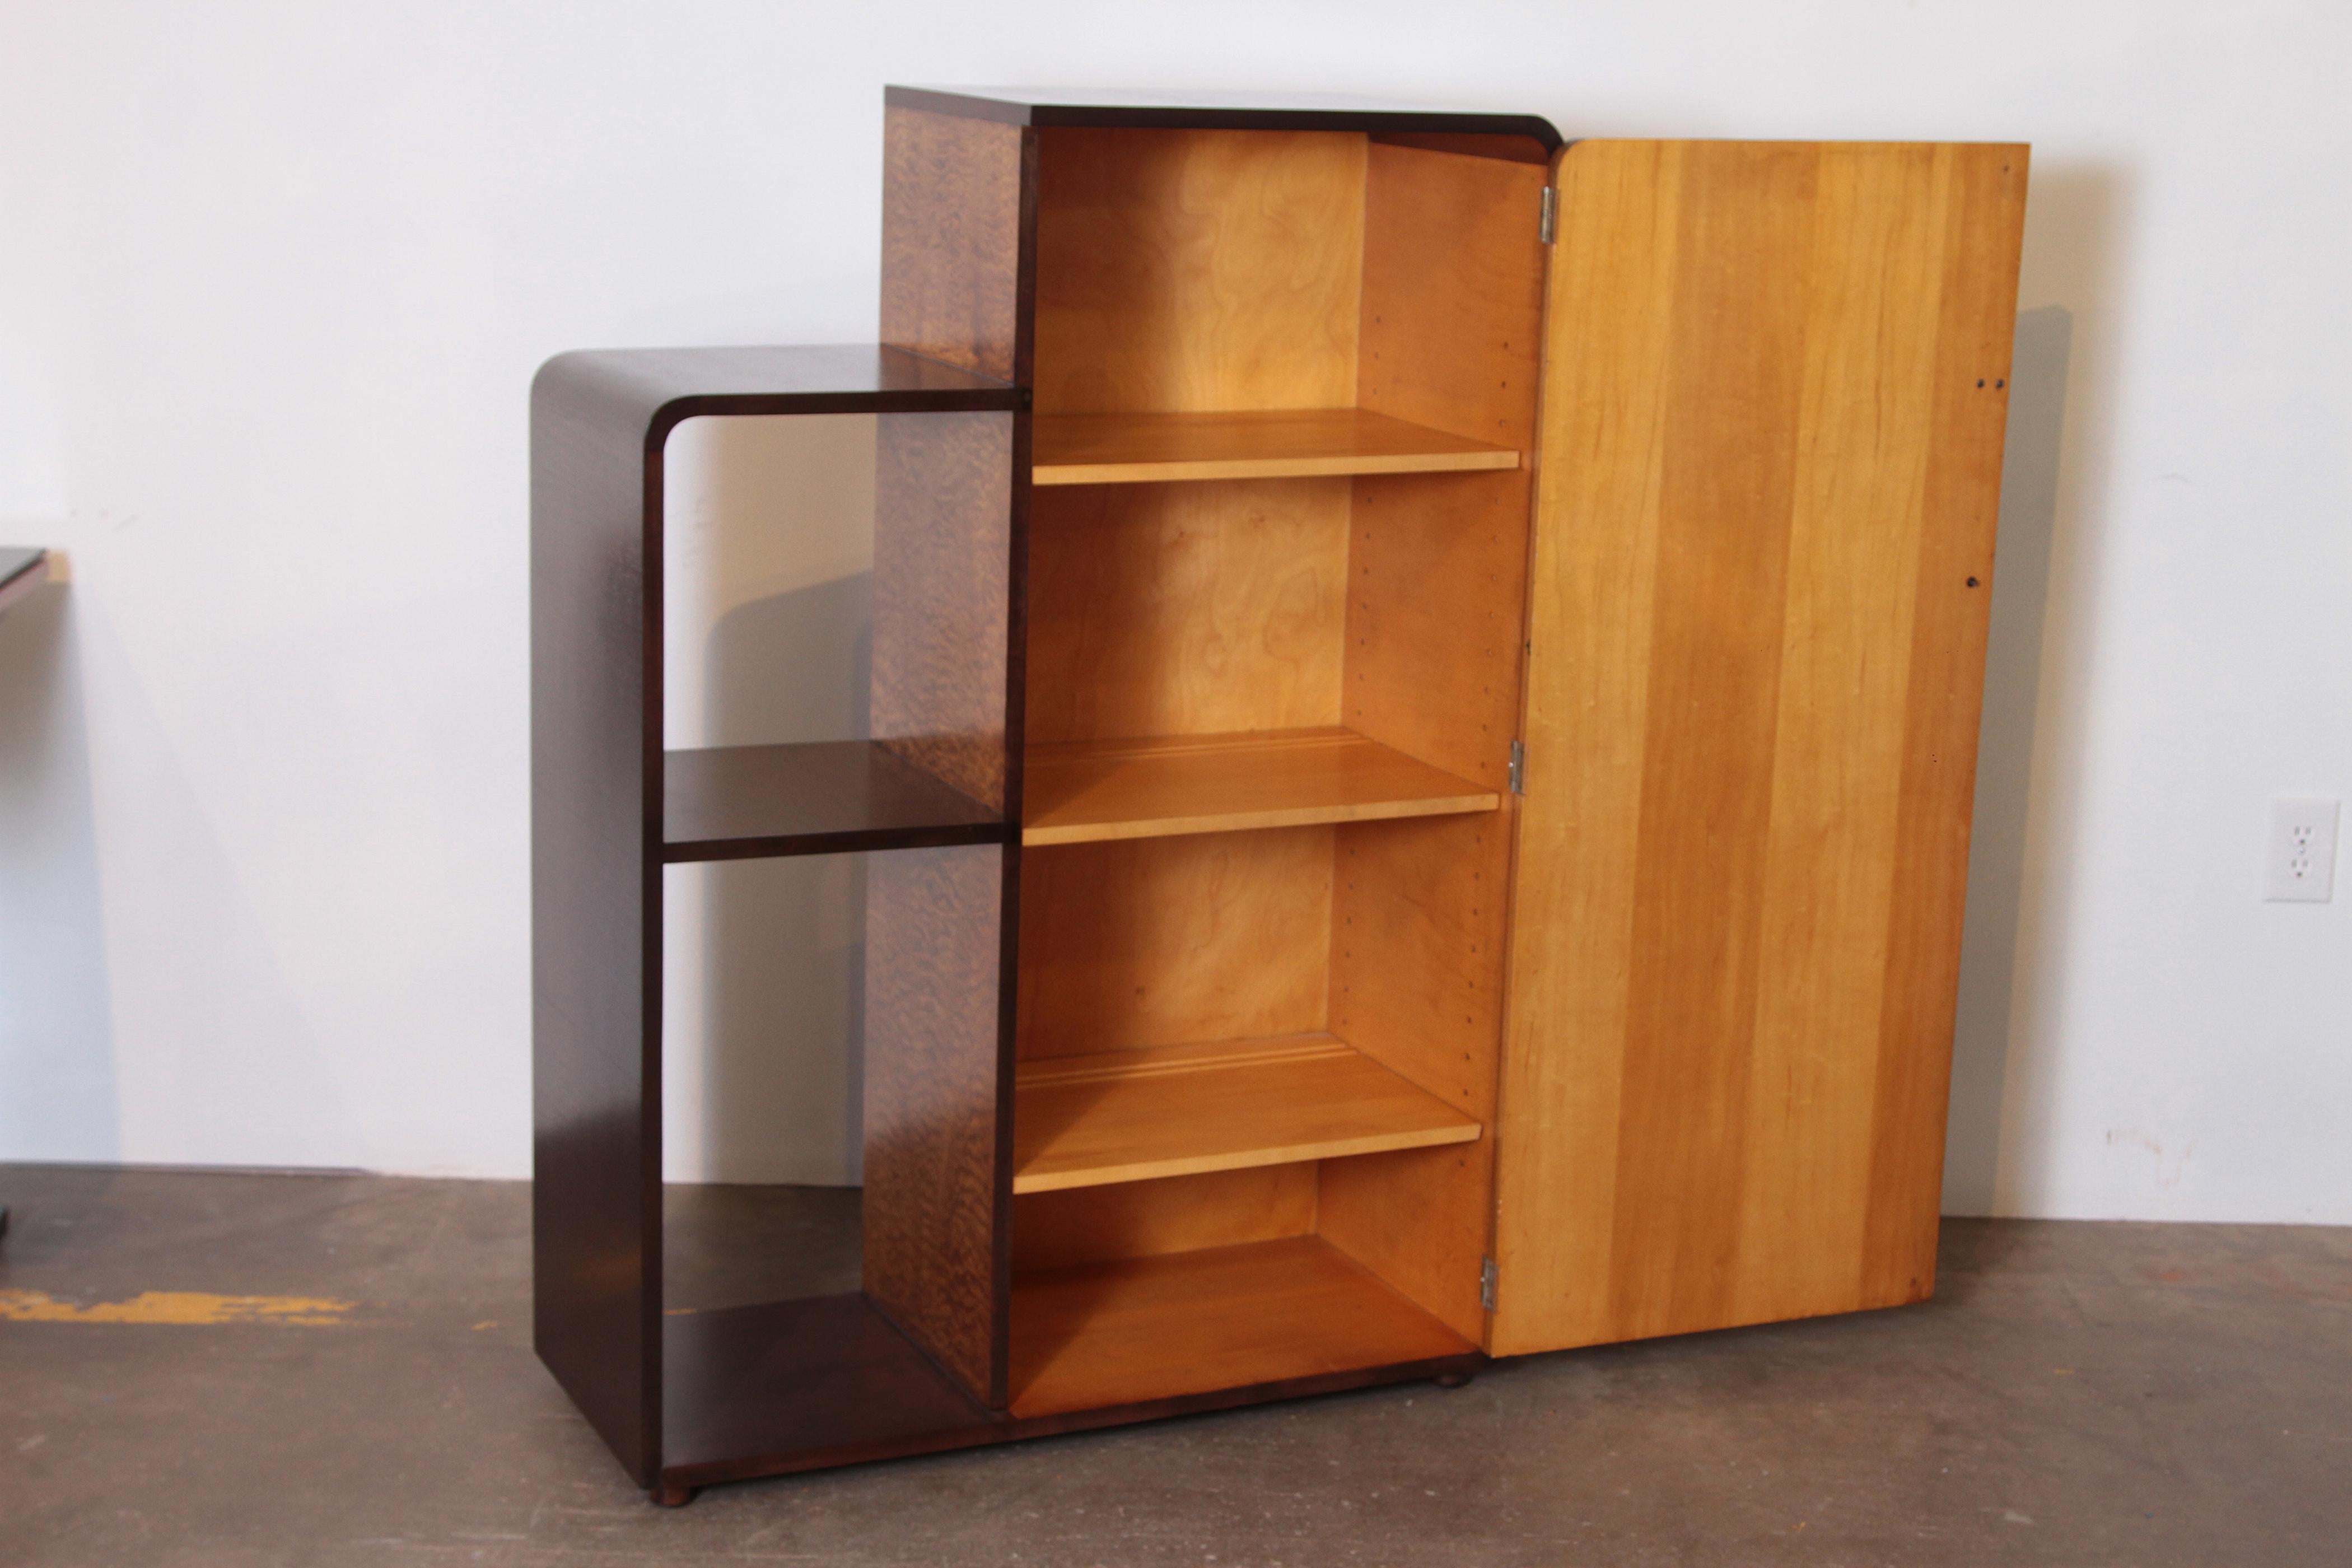 American Art Deco Machine Age Russel Wright Modern Furniture by Heywood Wakefield Cabinet